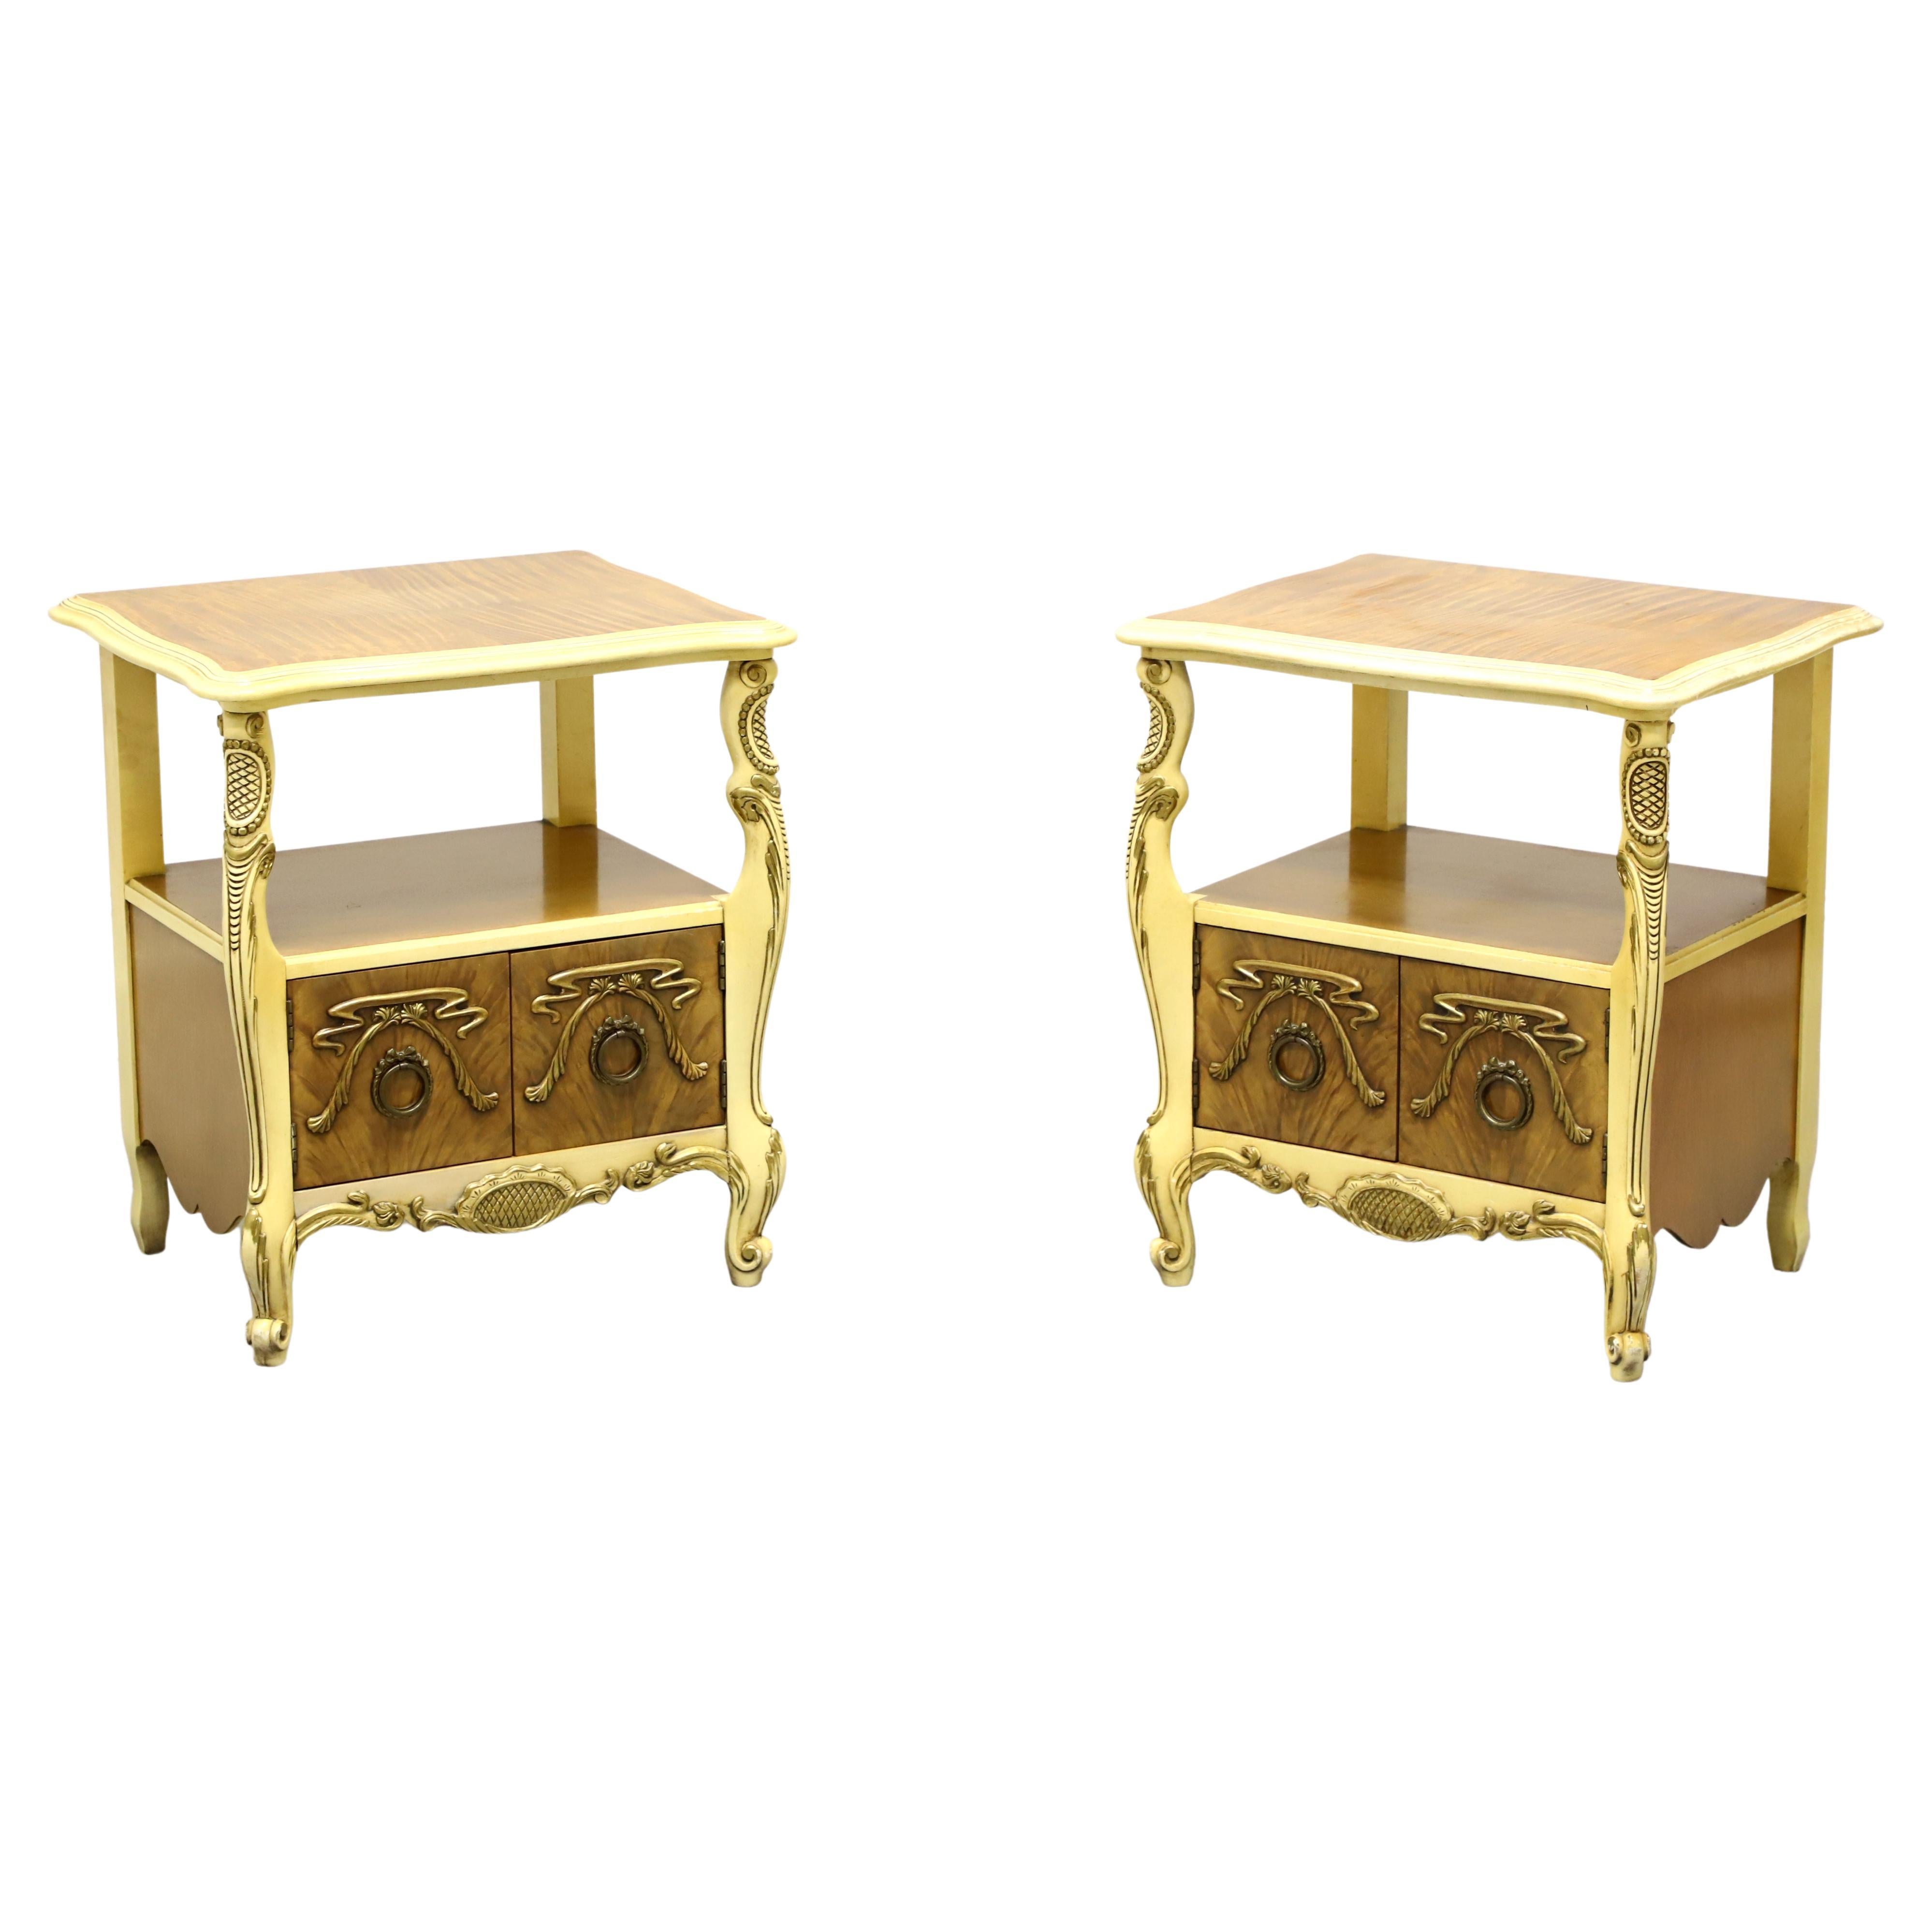 ROMWEBER Mid 20th Century Satinwood French Provincial Nightstands - Pair